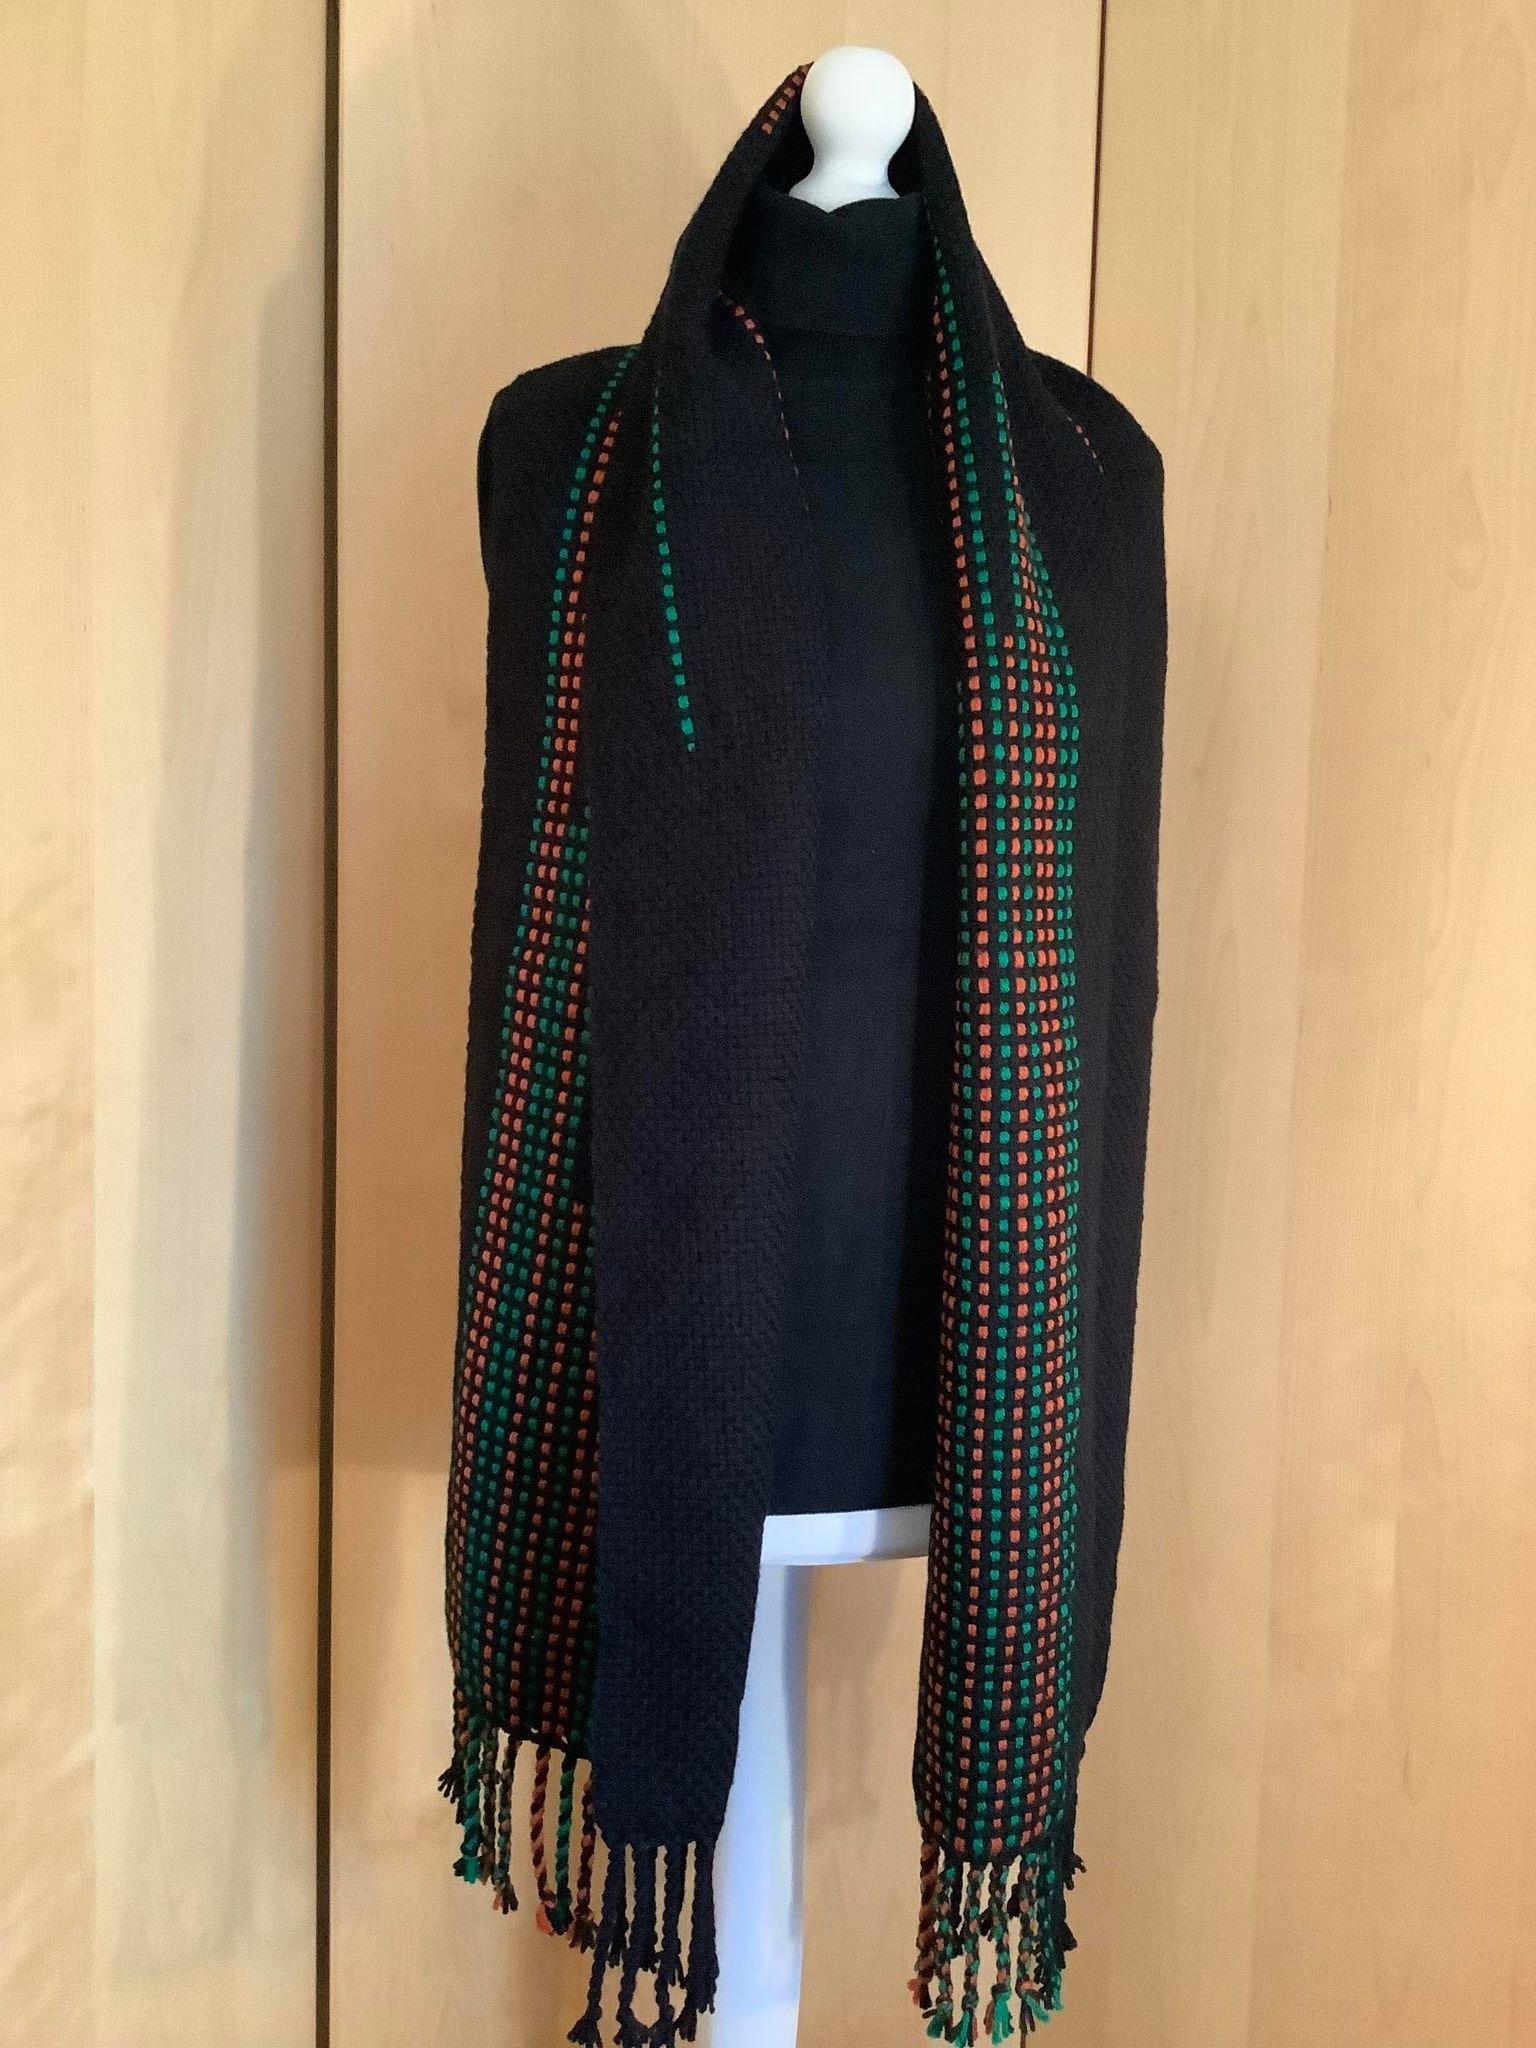 Scarf No2. Again kindly made by Robin Mackay with the OSBPG colours: This scarf is 186cm long plus two ends of 9cm tassels, which makes the total length of the scarf 204cm. The width is 34cm. It is made from 100% acrylic. further details on the night